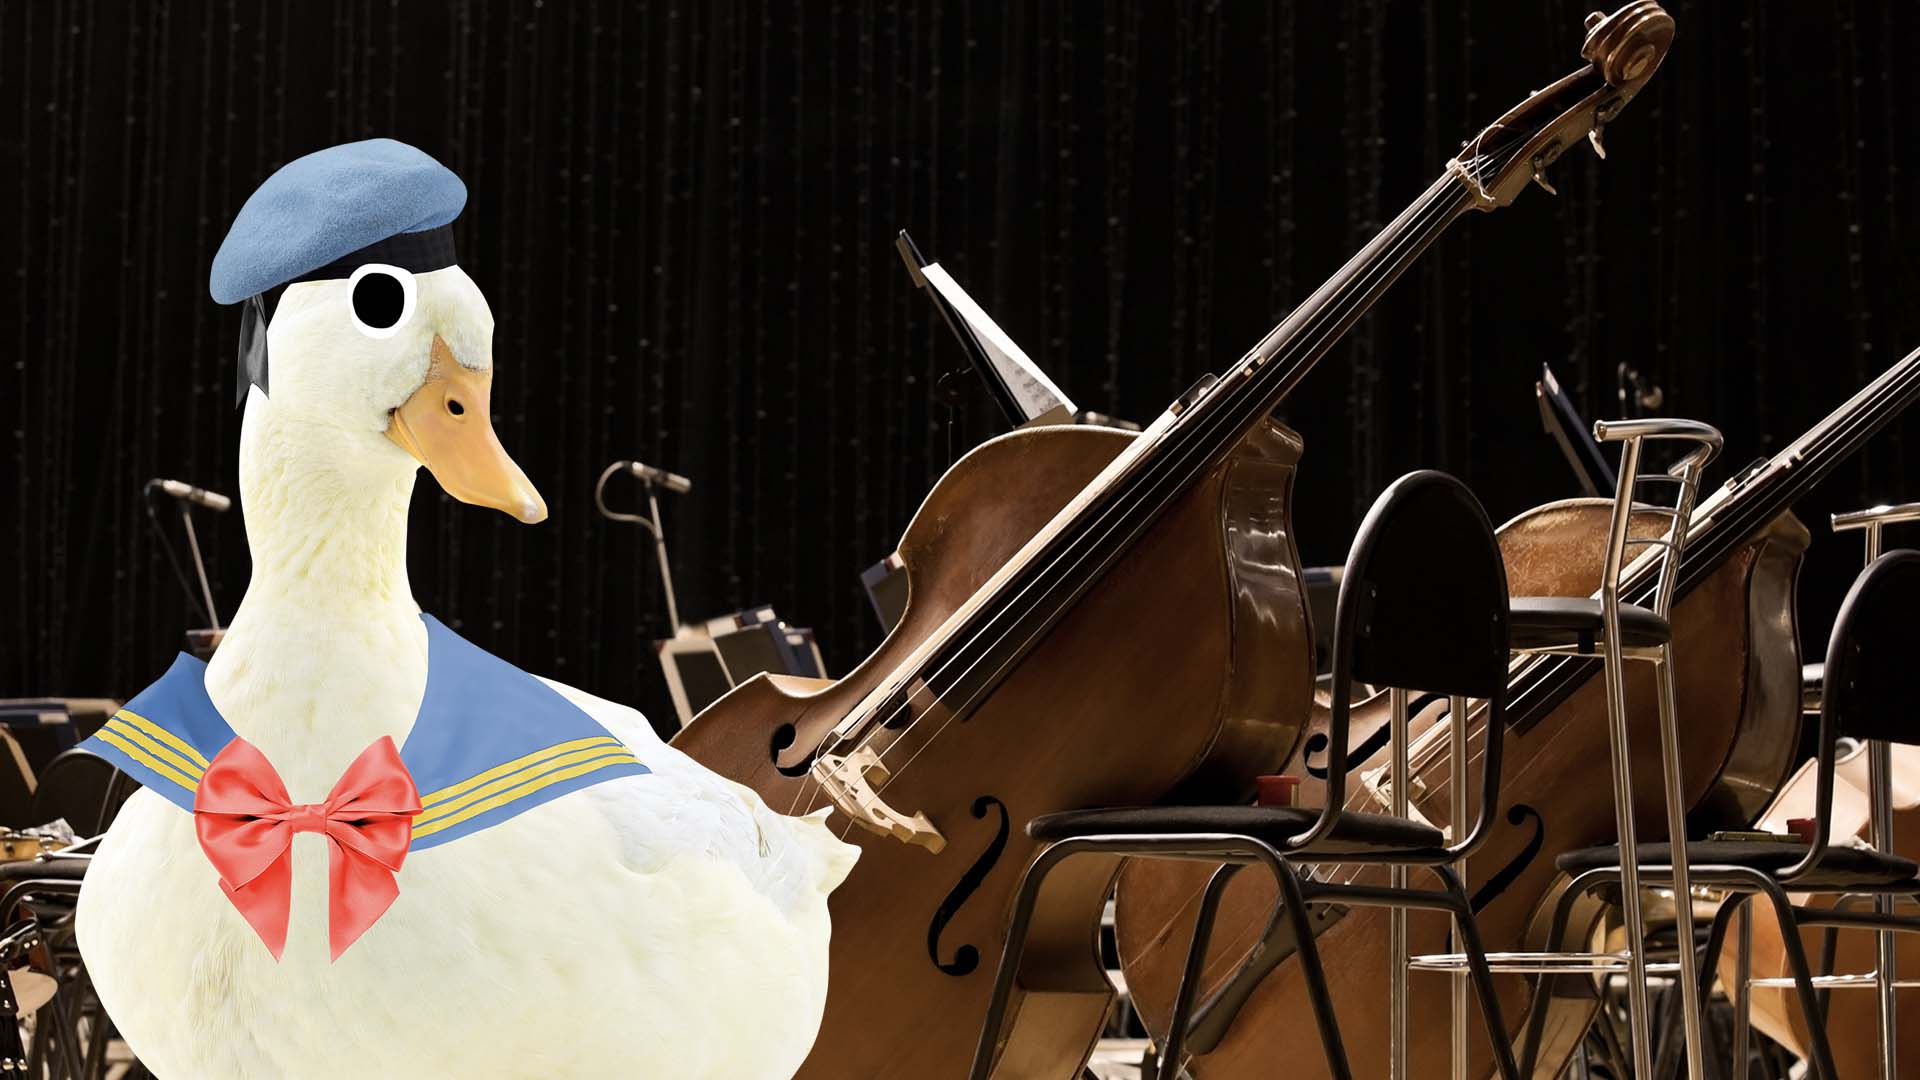 A duck standing next to a stage